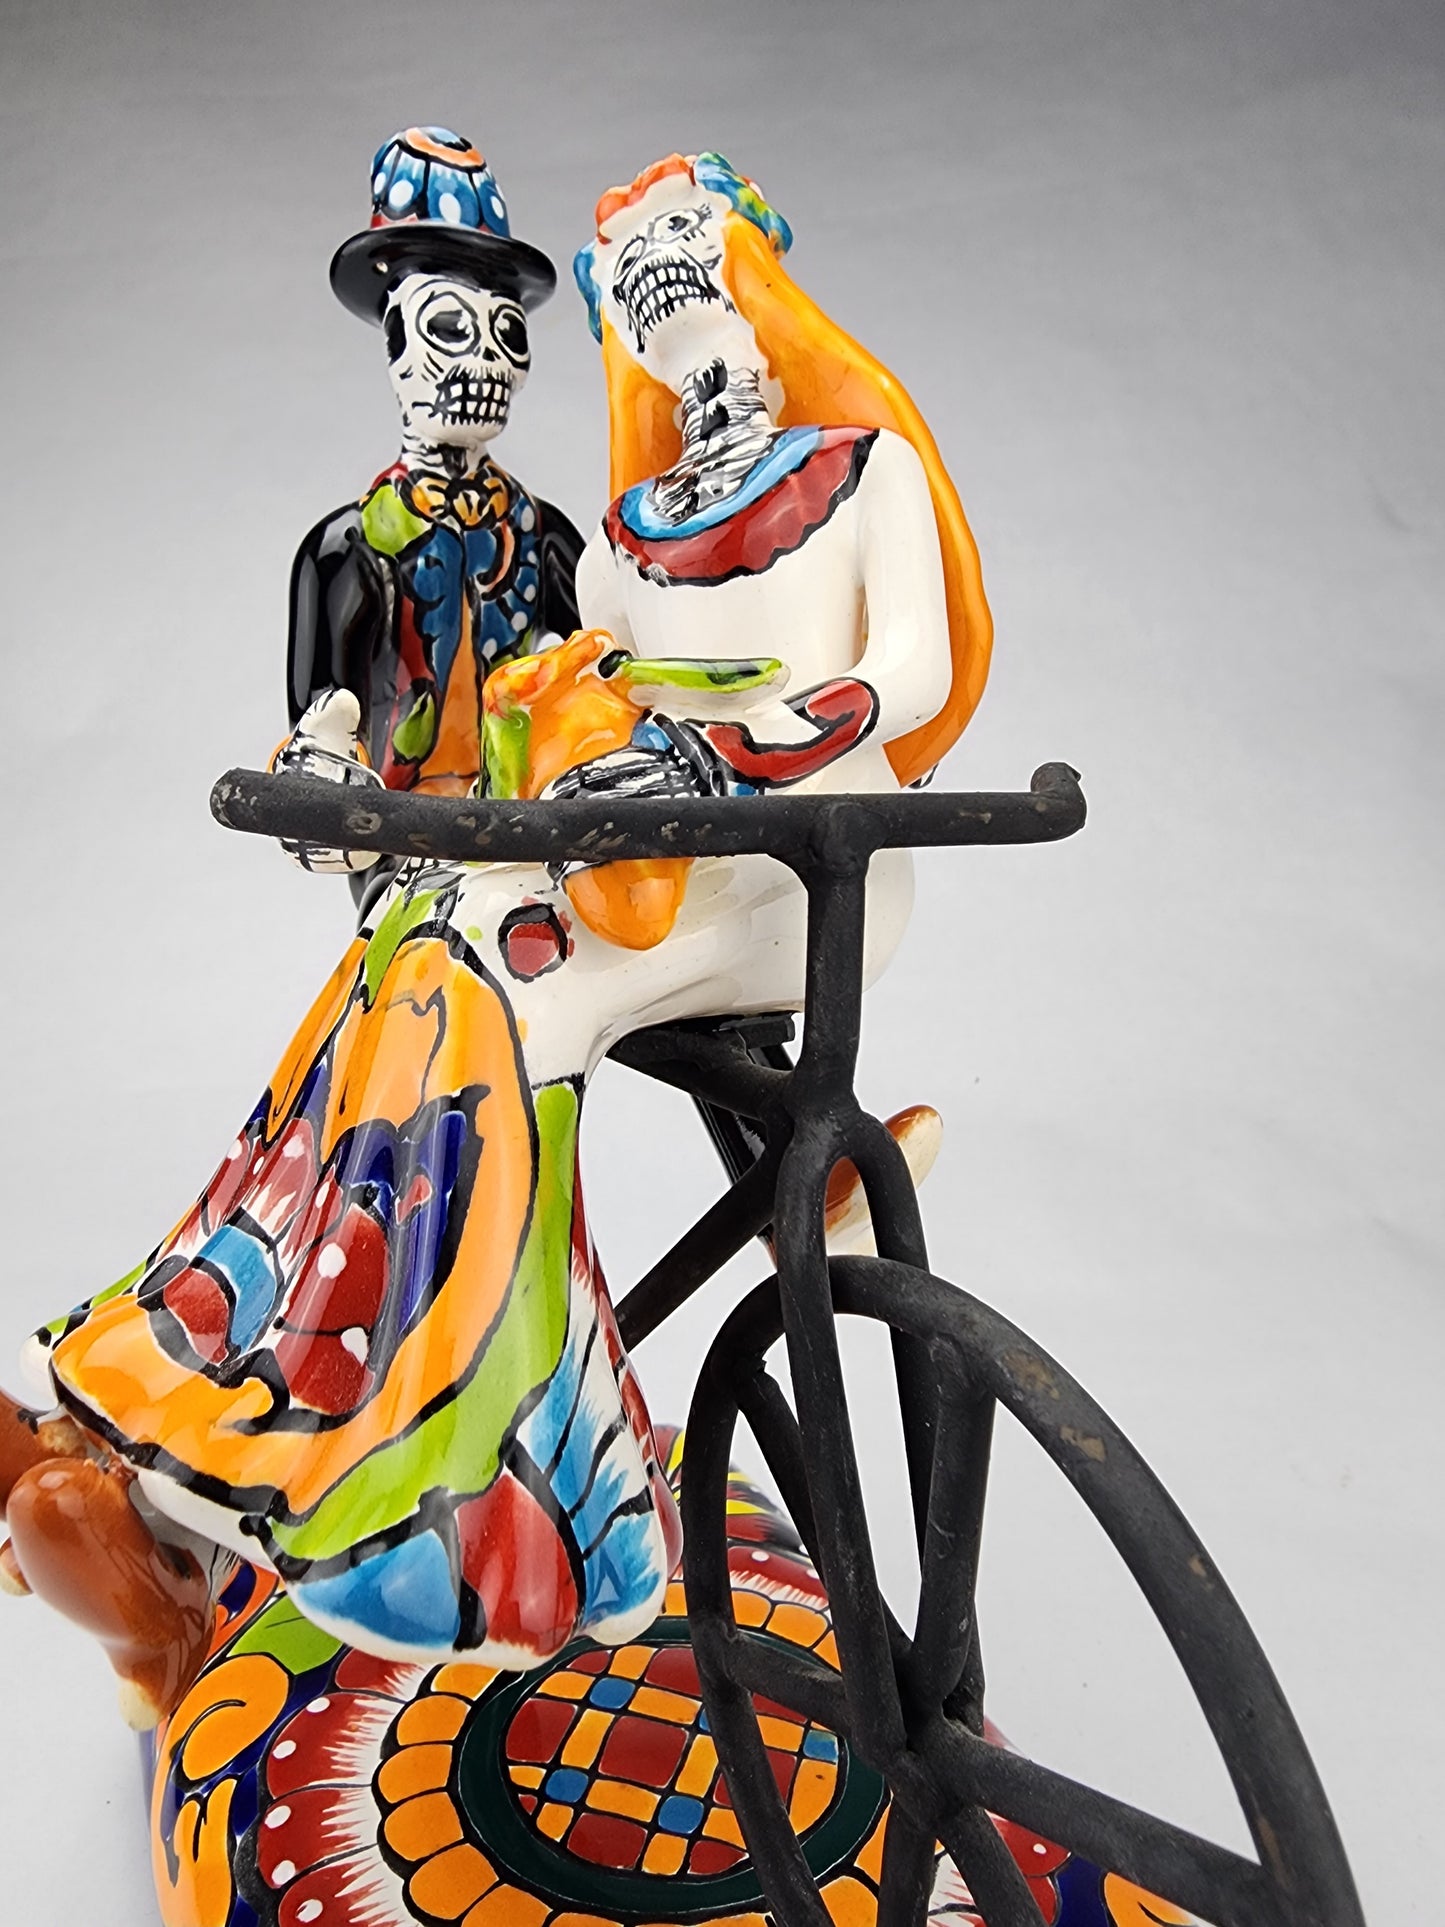 Day of the Dead Hand Painted Catrina Couple on Bike Mexican Folk Art